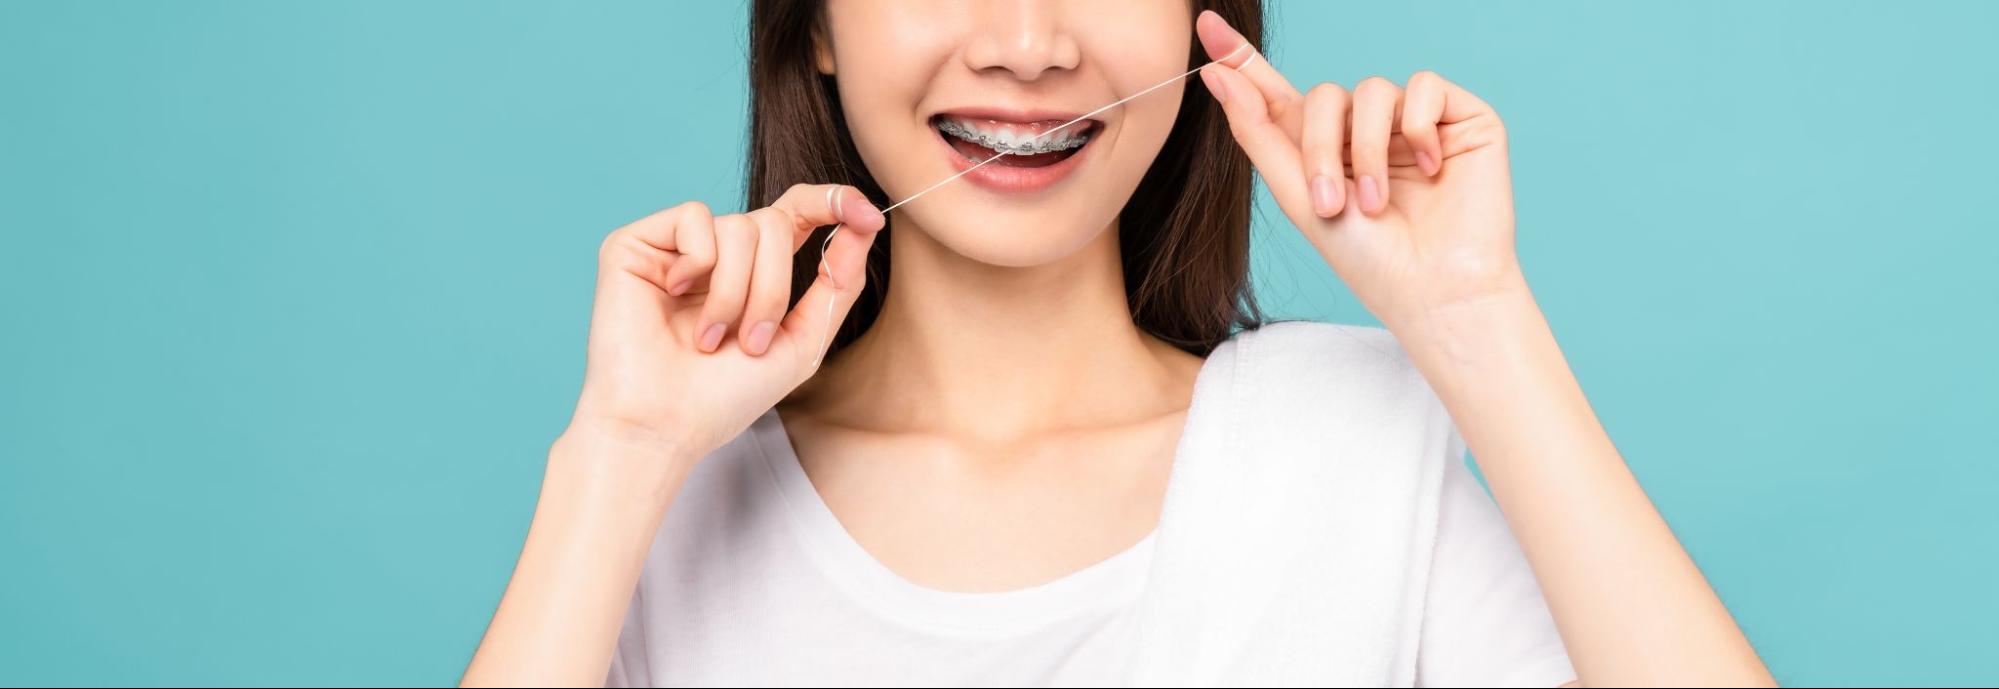 How To Maintain Your Smile After Orthodontic Treatment